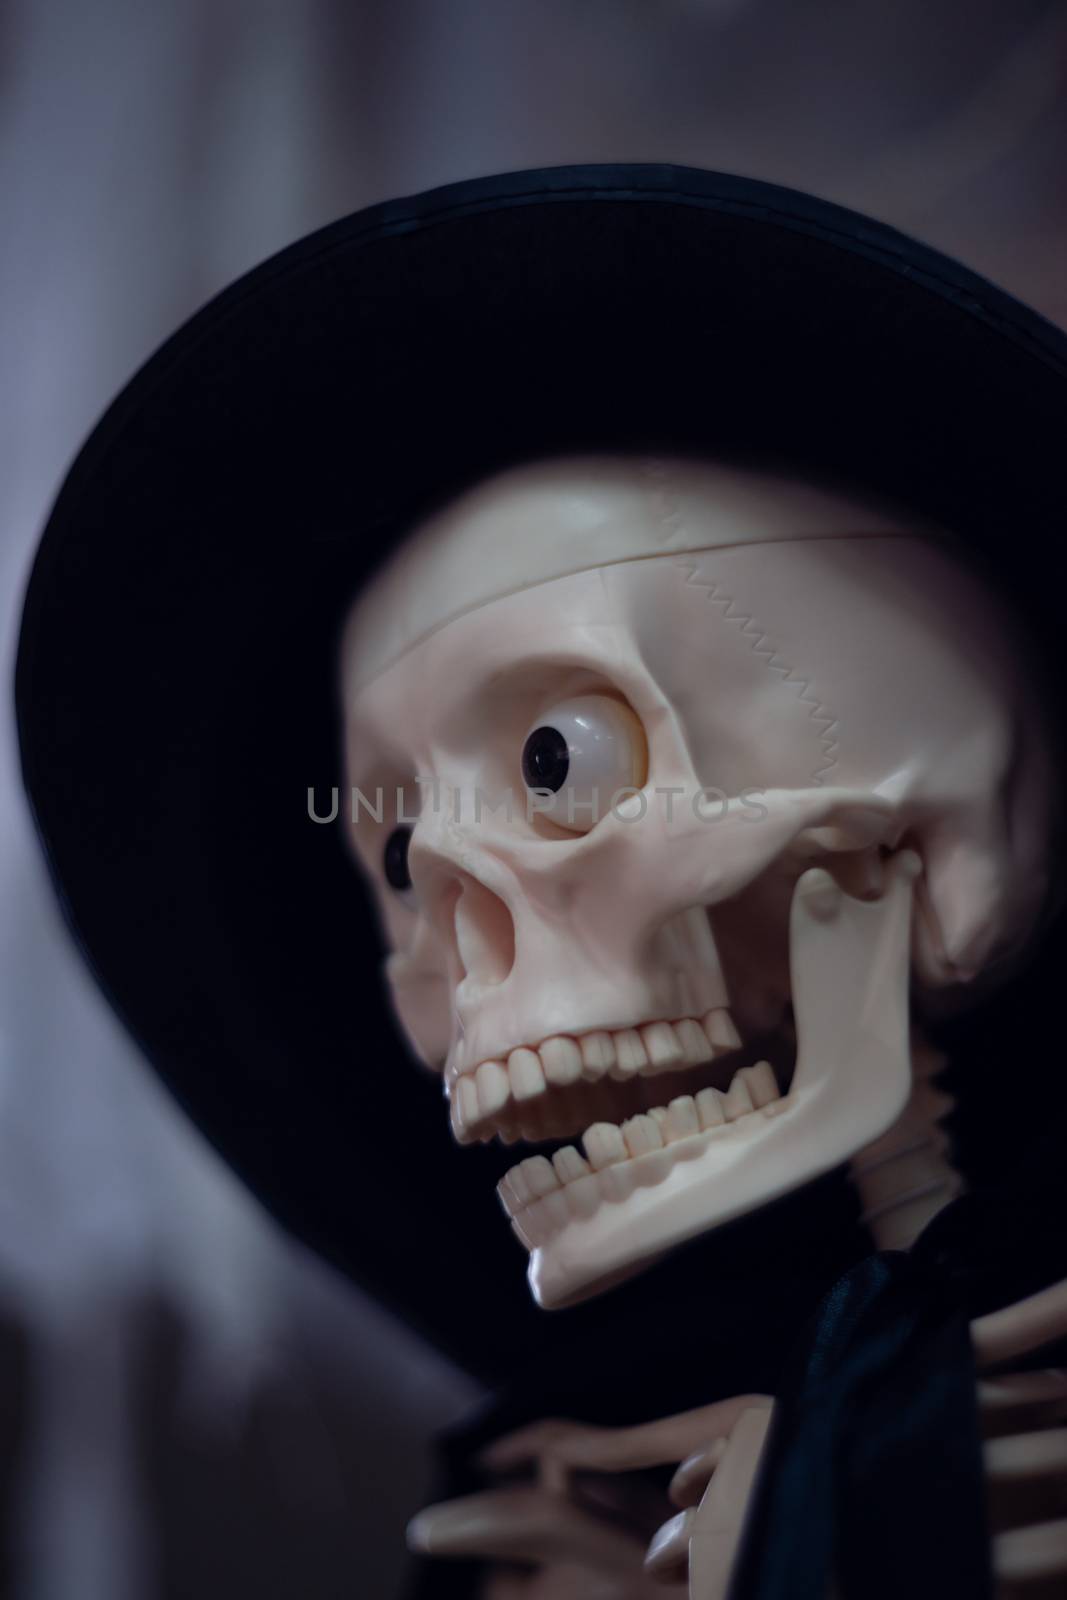 Skeleton with hat on head and cloak. Close-up view. Halloween decoration and blurred background.